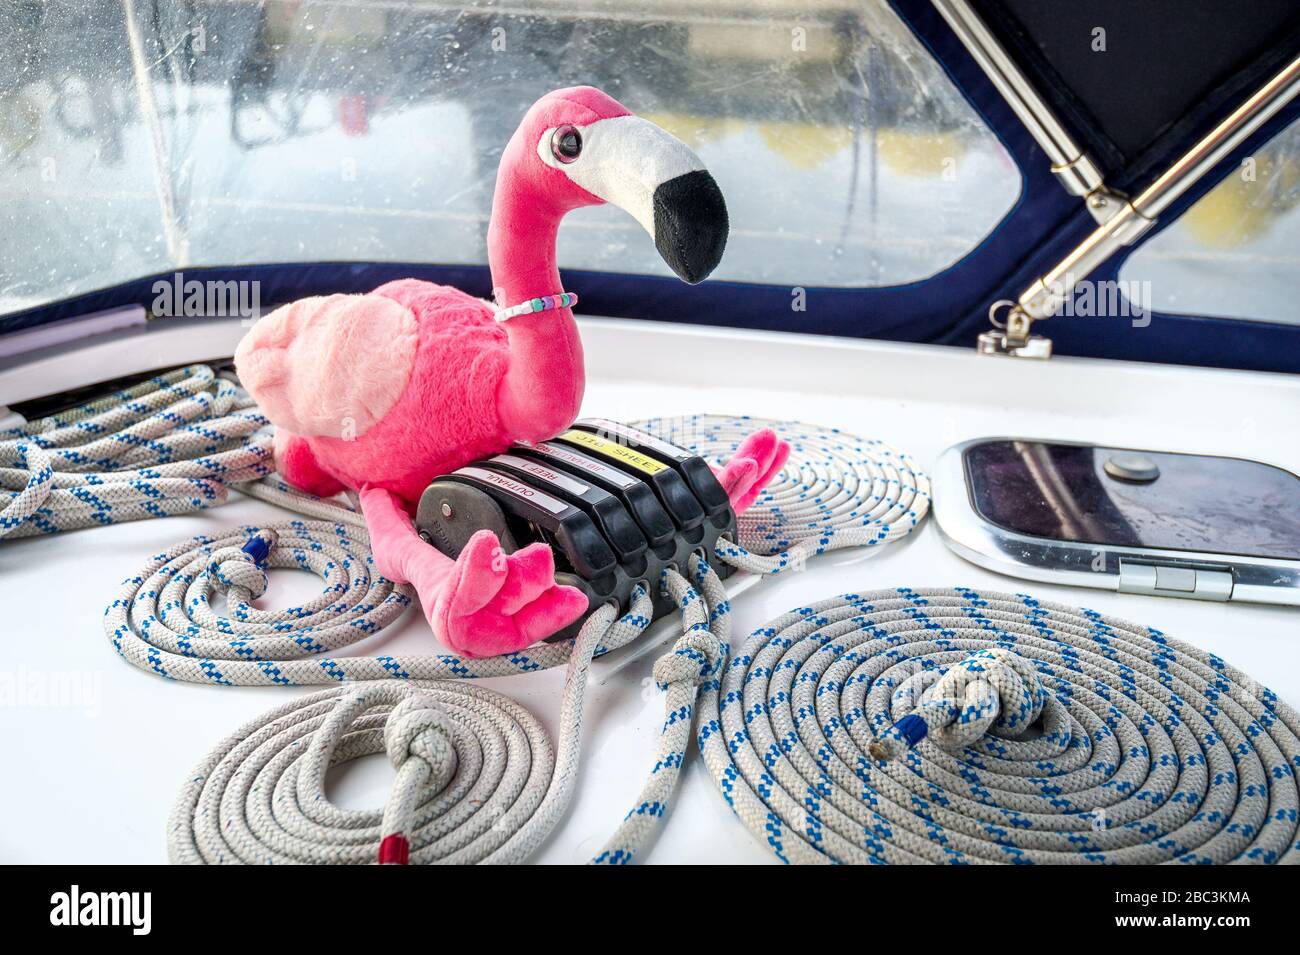 Pink flamingo toy and sailing yacht ropes perfectly coiled near it's clamps. Largs, Scotland. Stock Photo